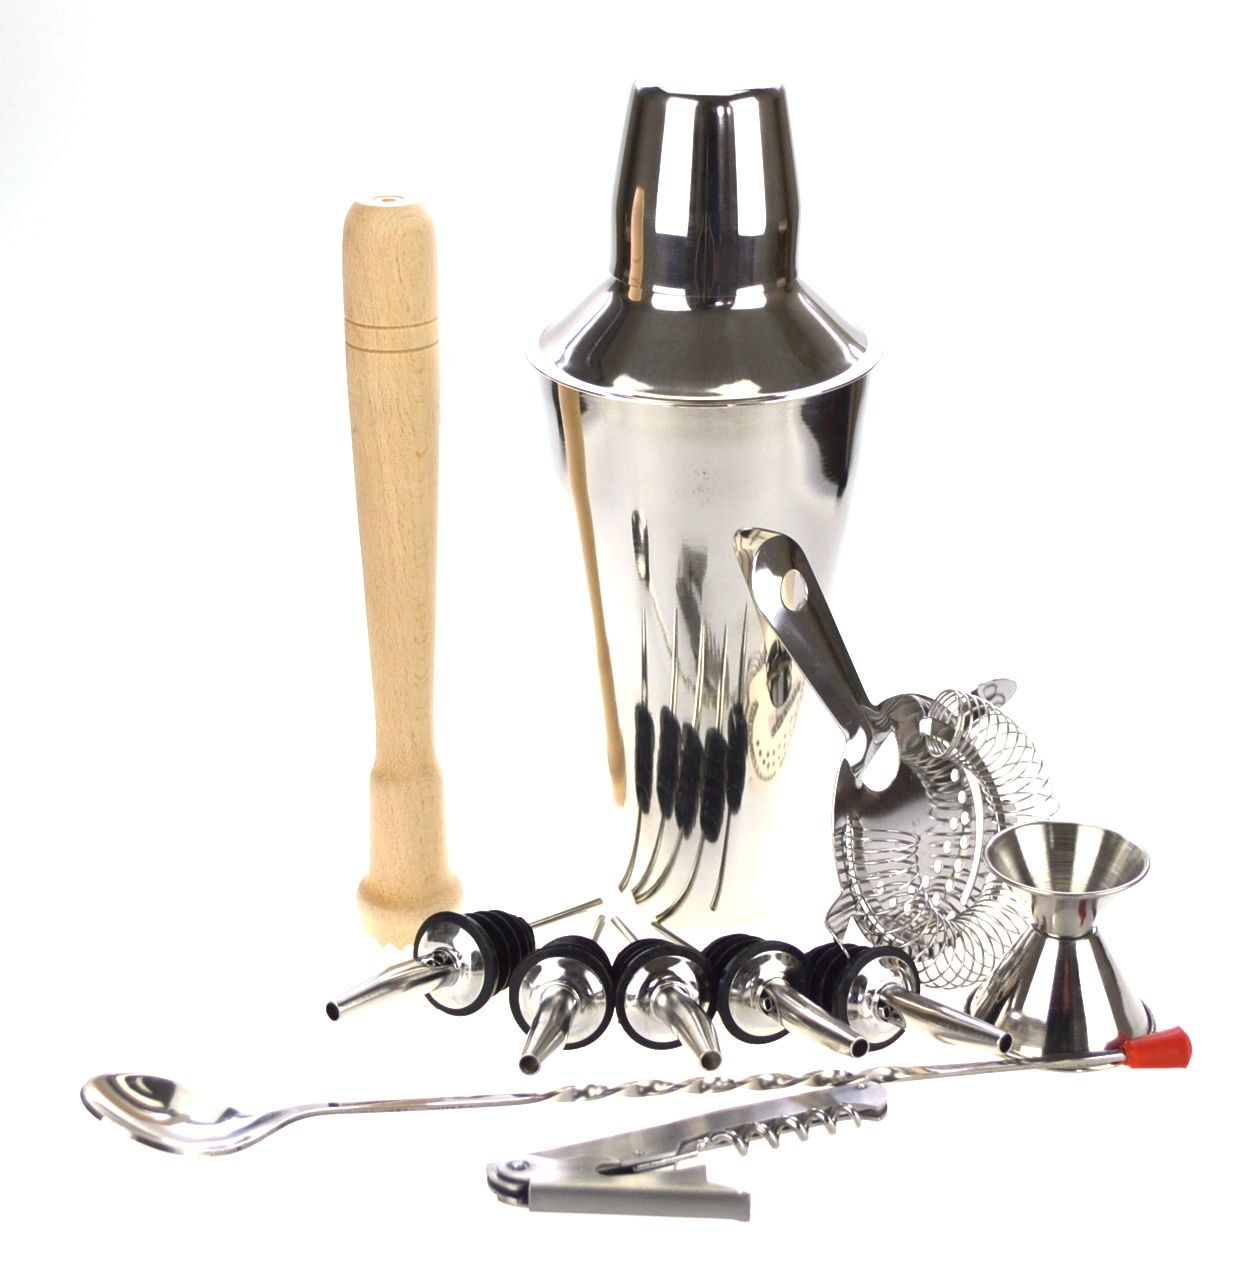 10 Piece Cocktail Shaker Set - With Waiters Friend